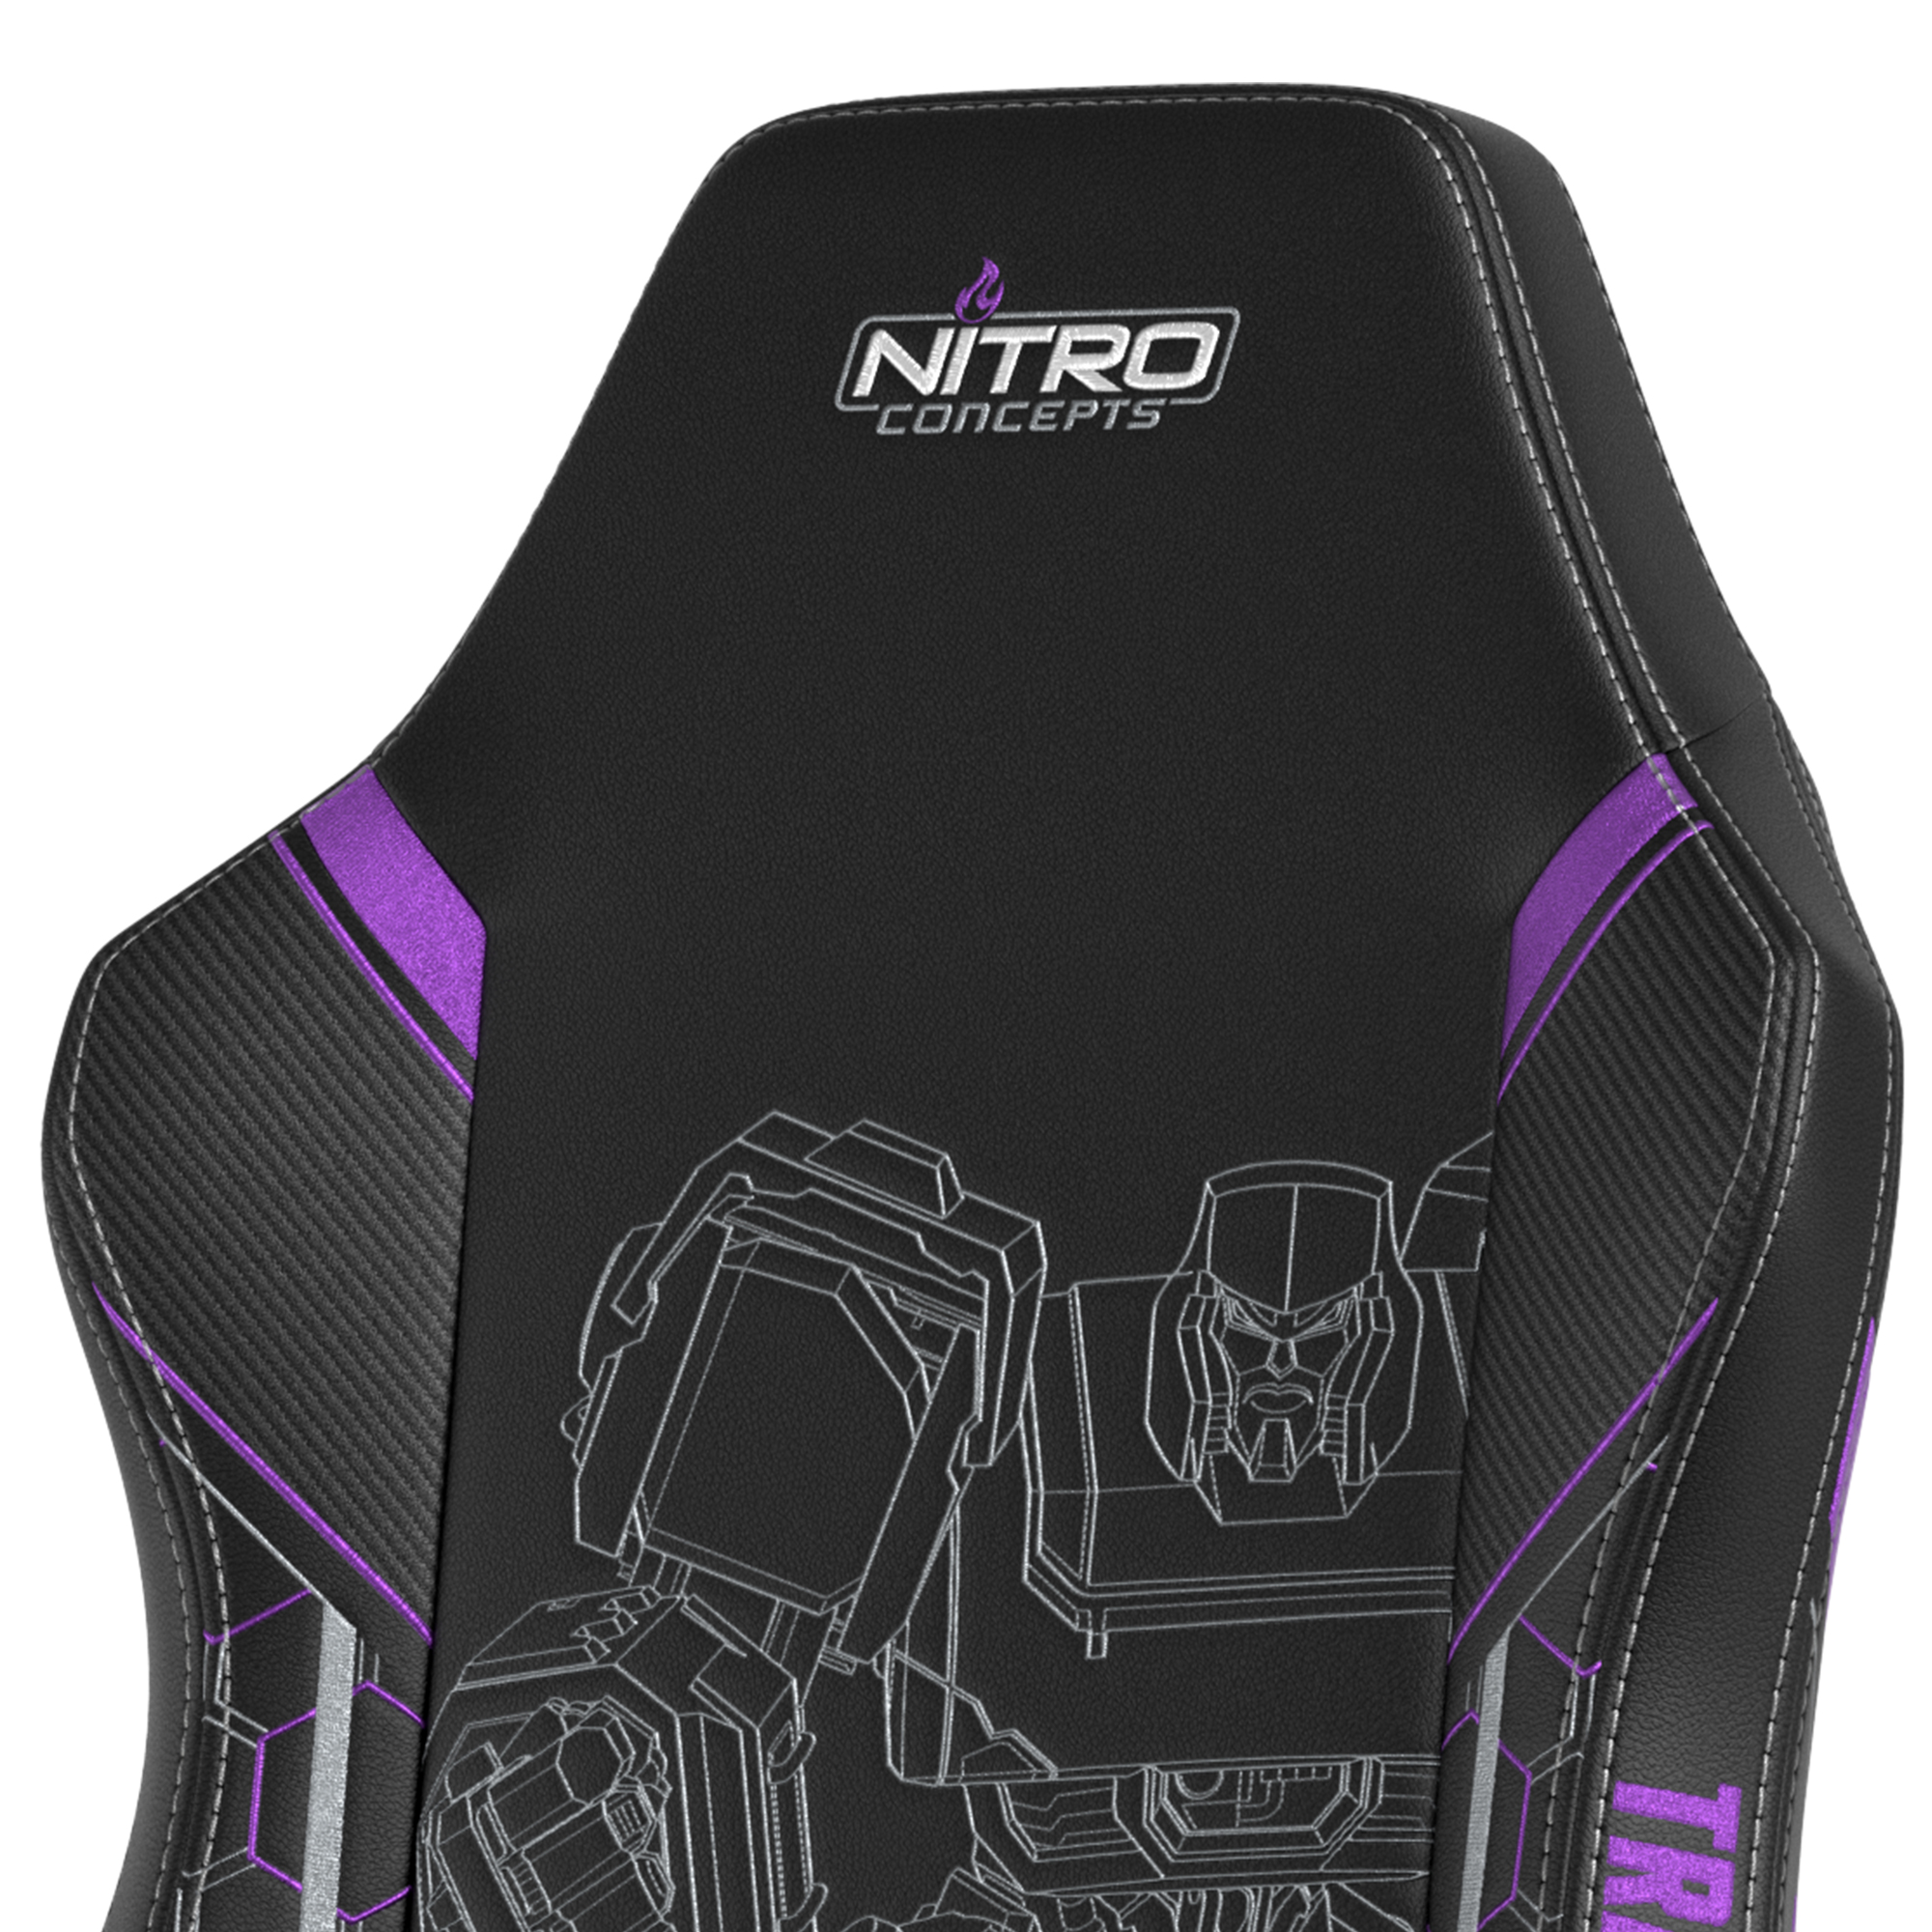 X1000 Gaming Chair Transformers Decepticons Edition